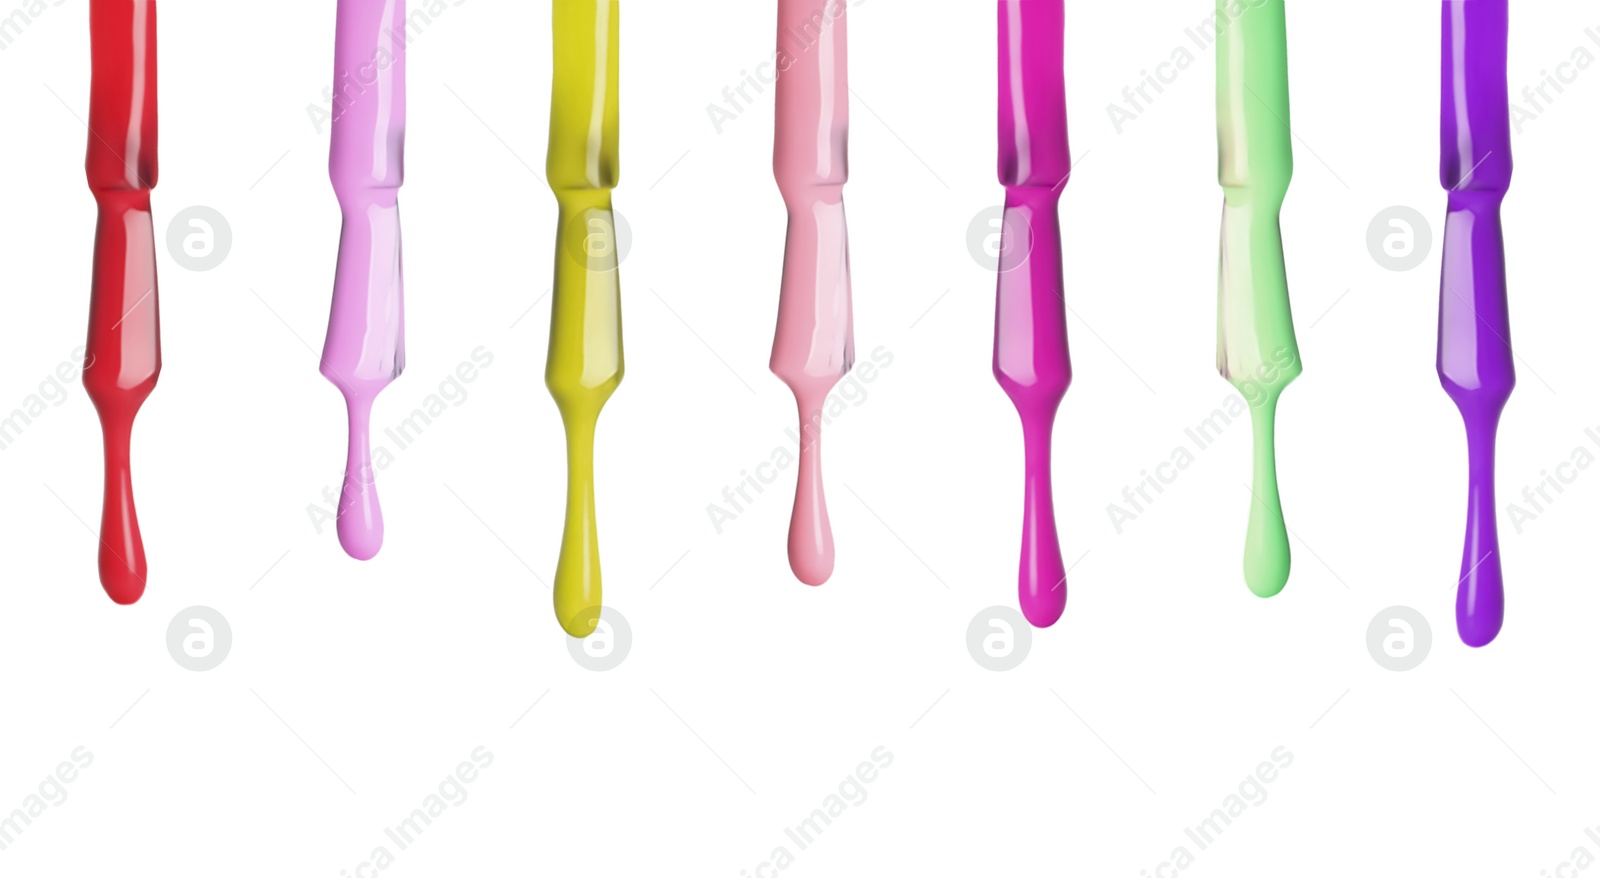 Image of Set of different nail polishes dripping on white background